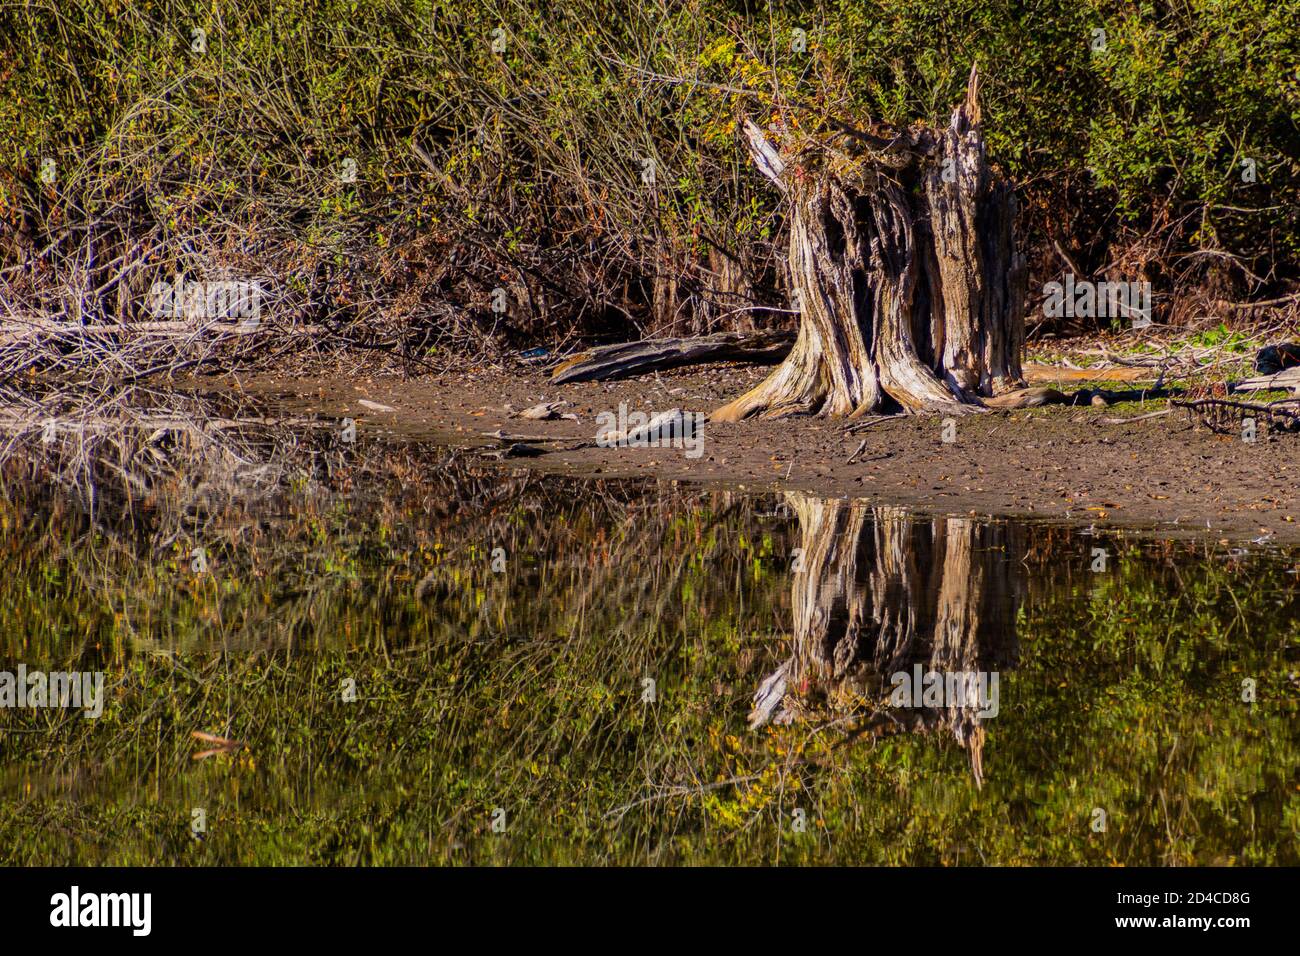 Old tree stump reflecting in the remaining water of a dried out lake Stock Photo